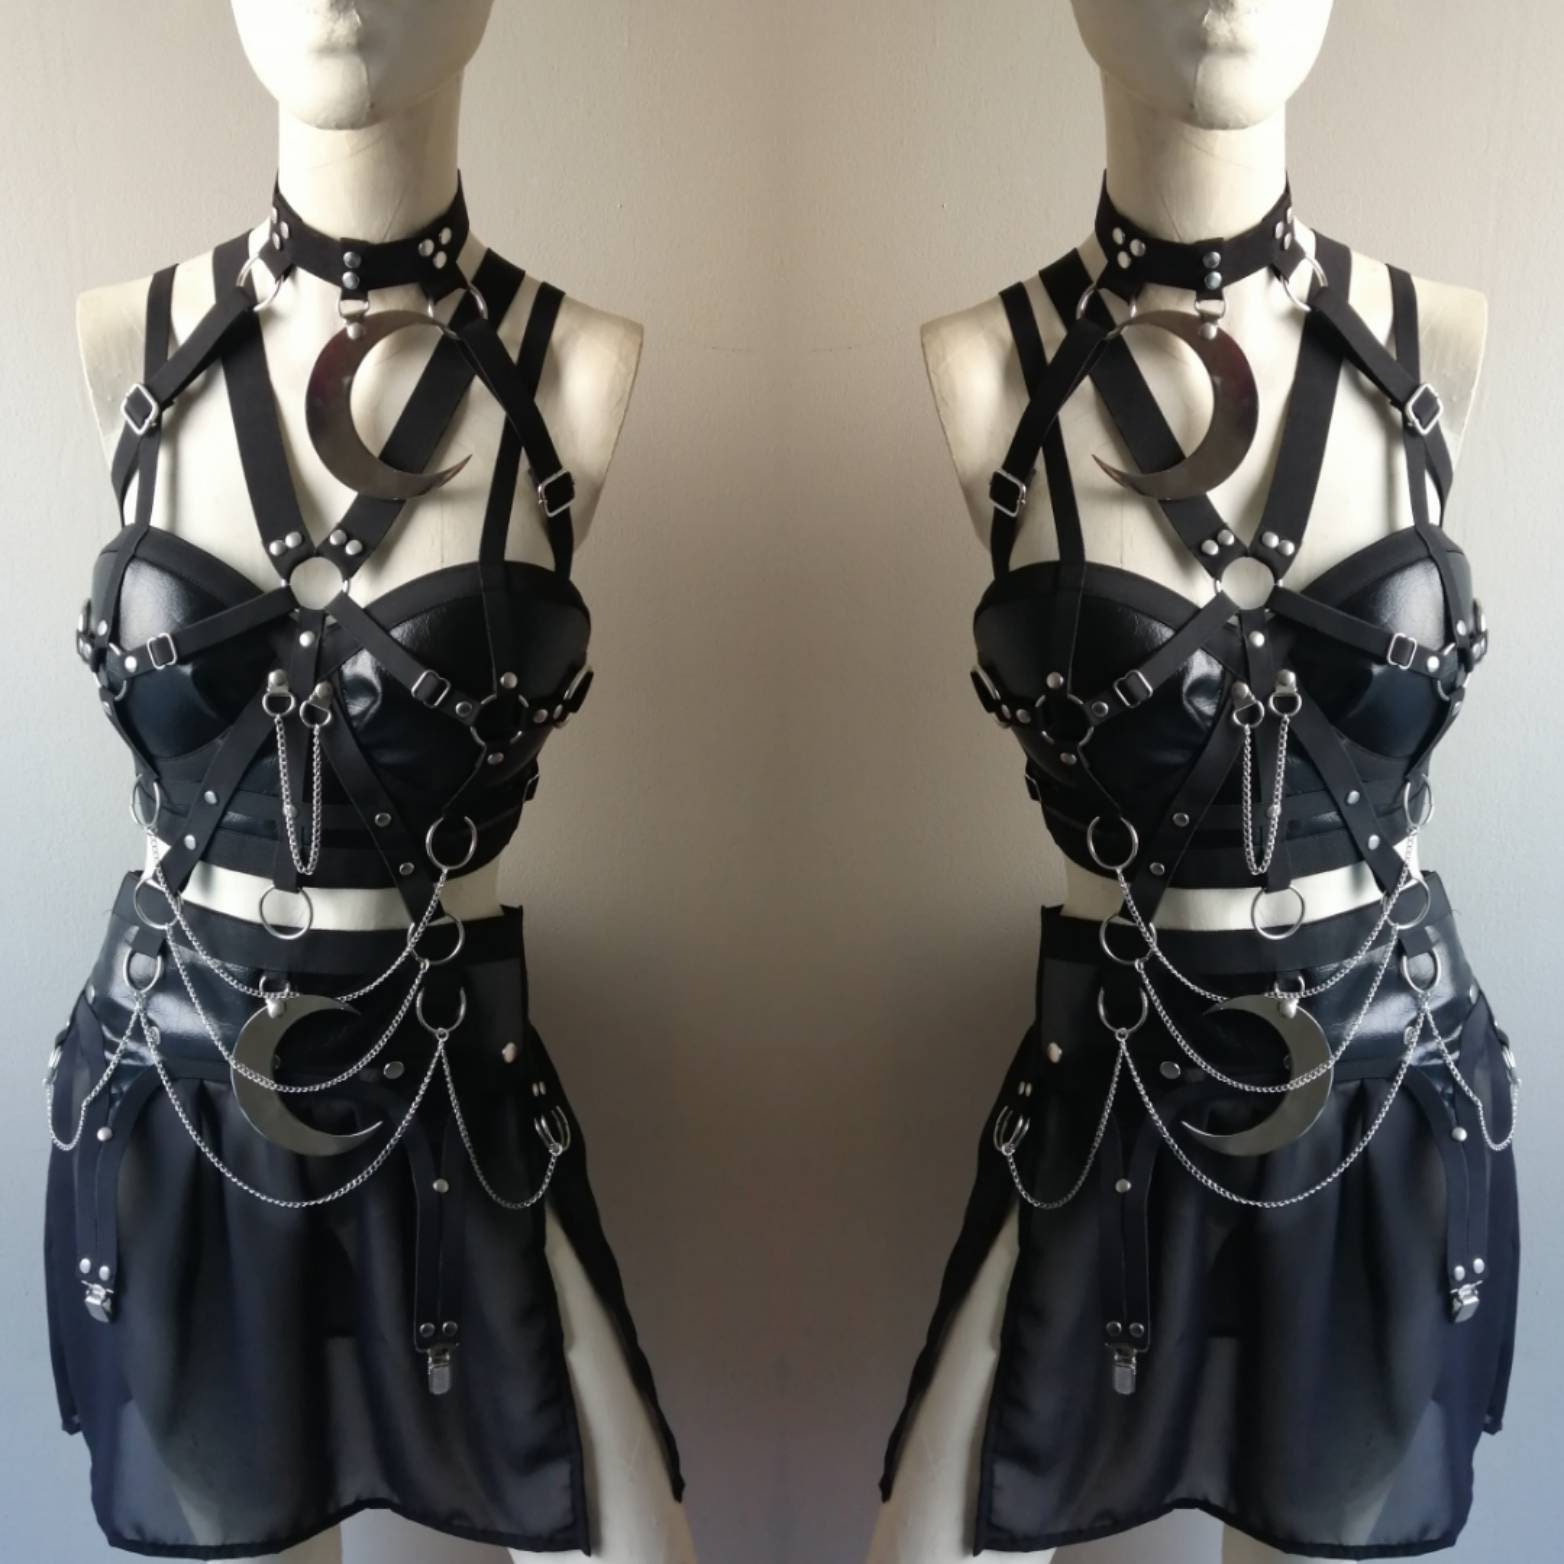 Gothic Outfit (moon) crescent moon large pedantno corset top and garter belt mini skirt gothic wiccan fashion boho festival wear photo